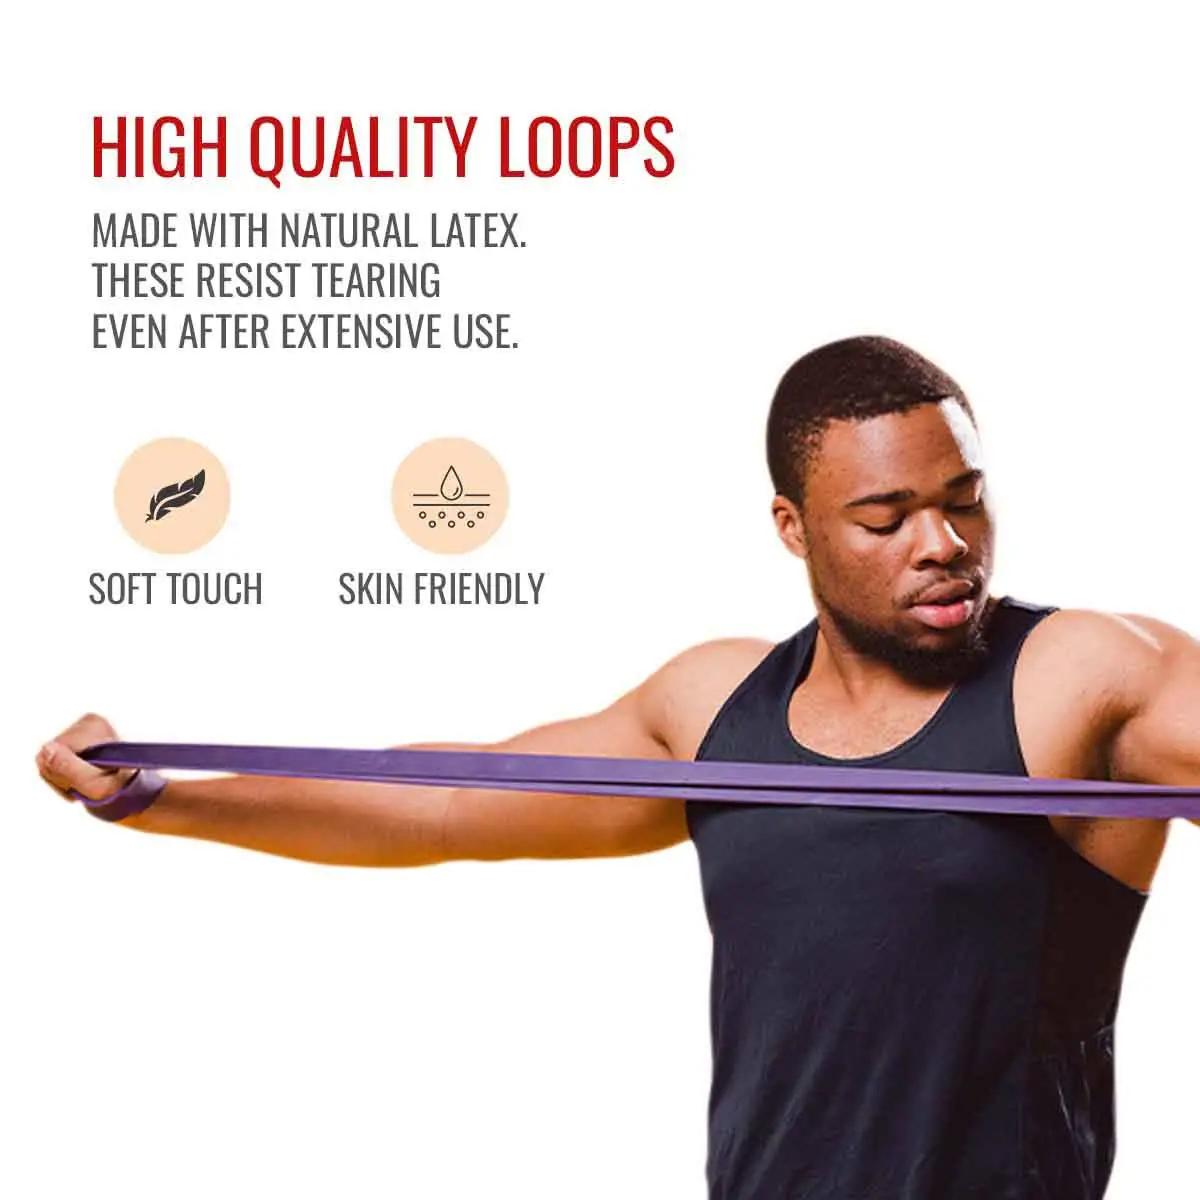 Durafit Resistance Band Orlb5 with High Quality Loops